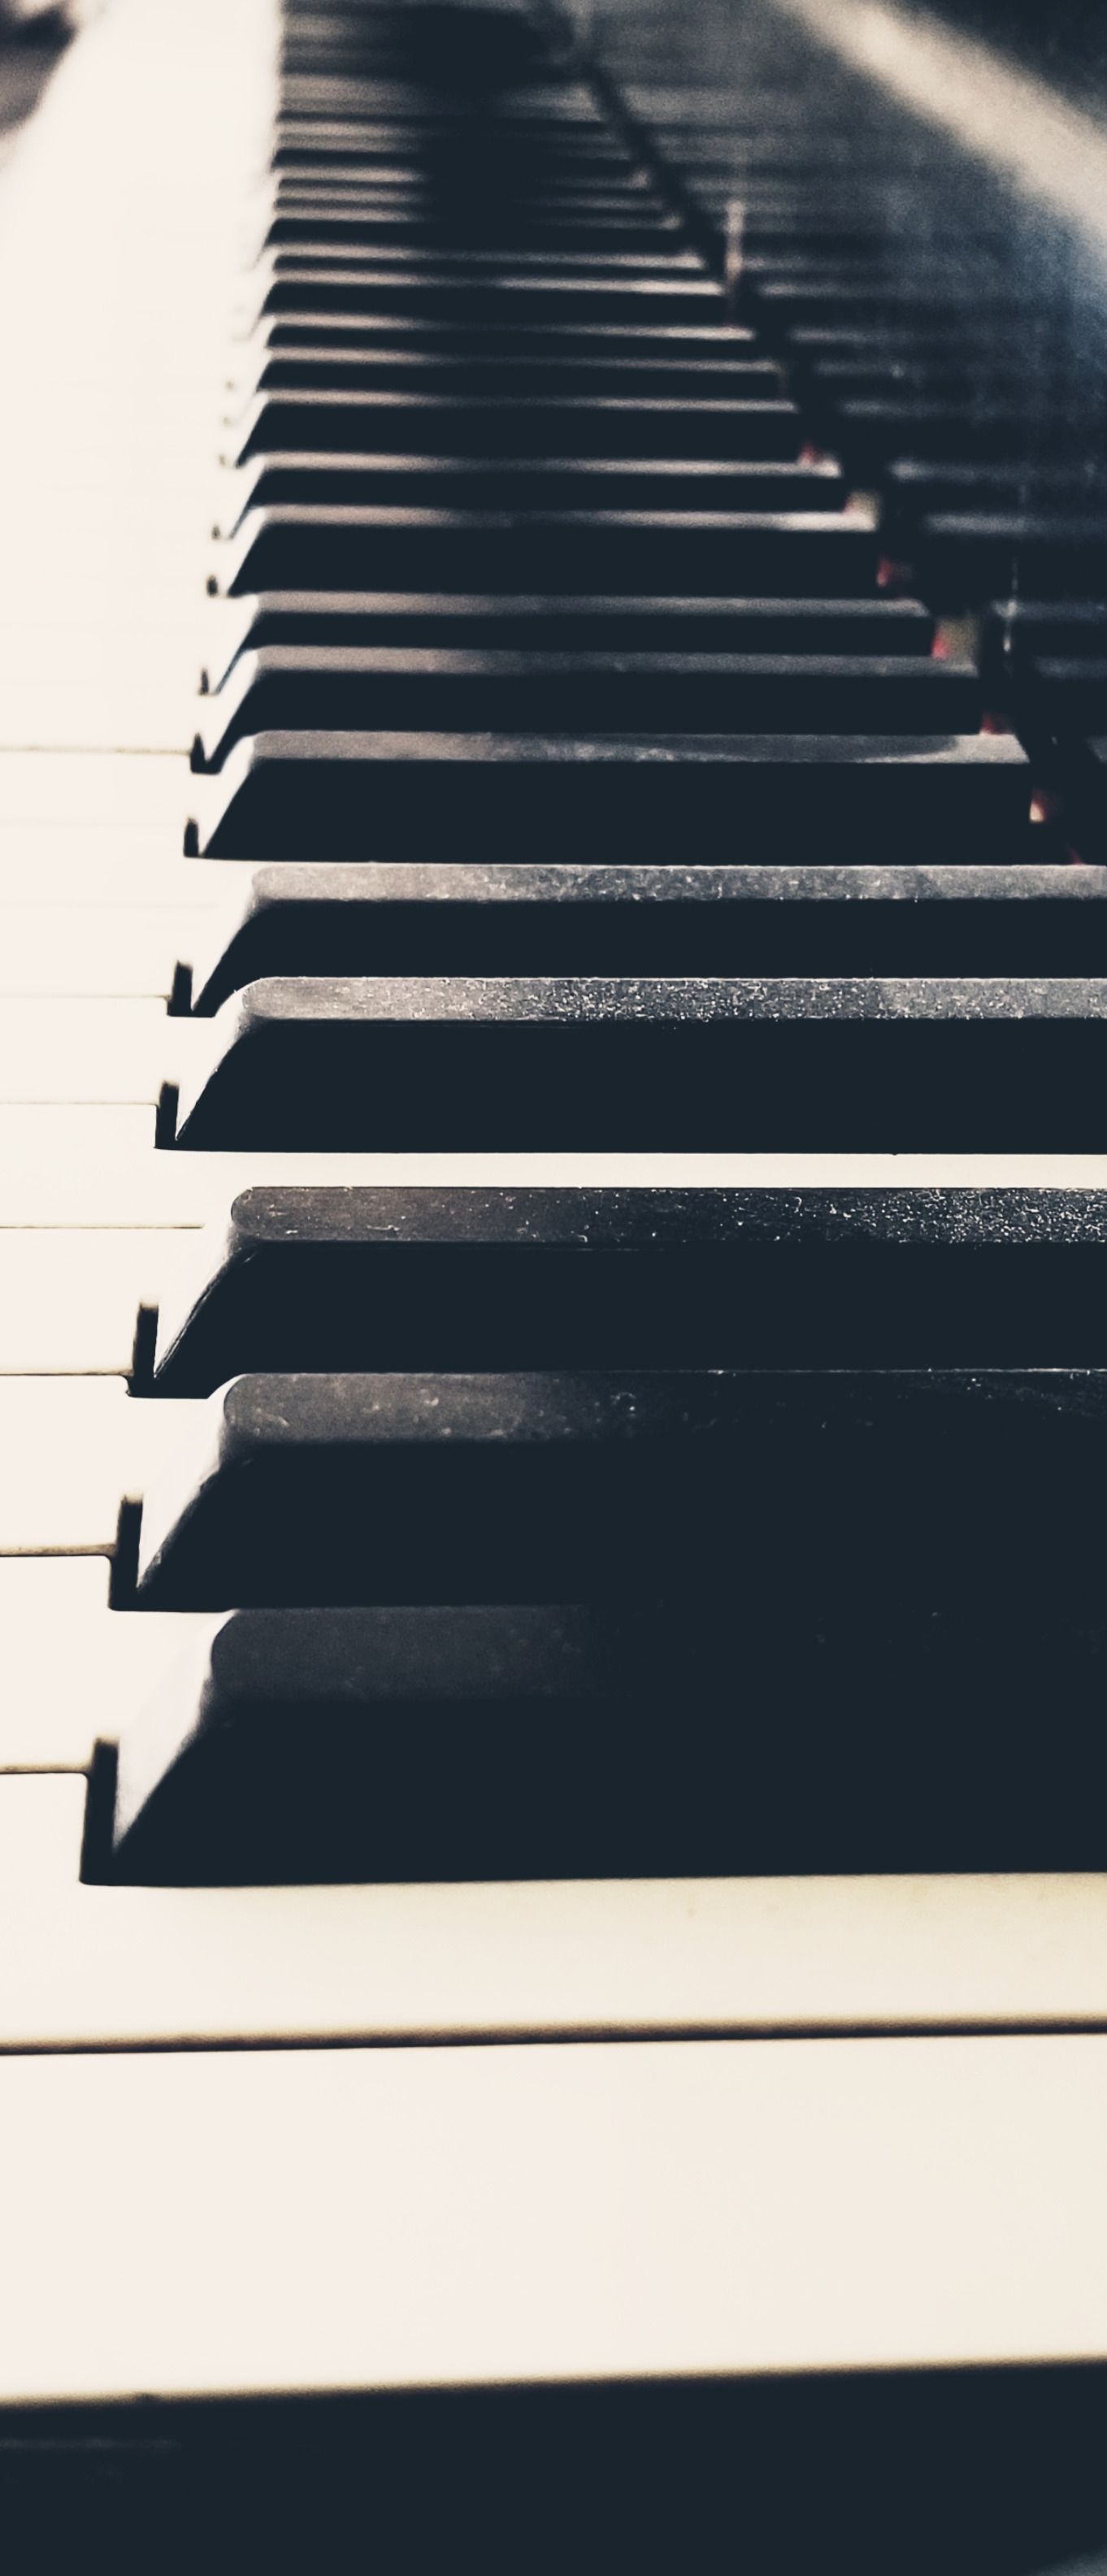 Grand Piano: A stringed keyboard musical instrument with a row of 88 black and white keys. 1370x3170 HD Background.